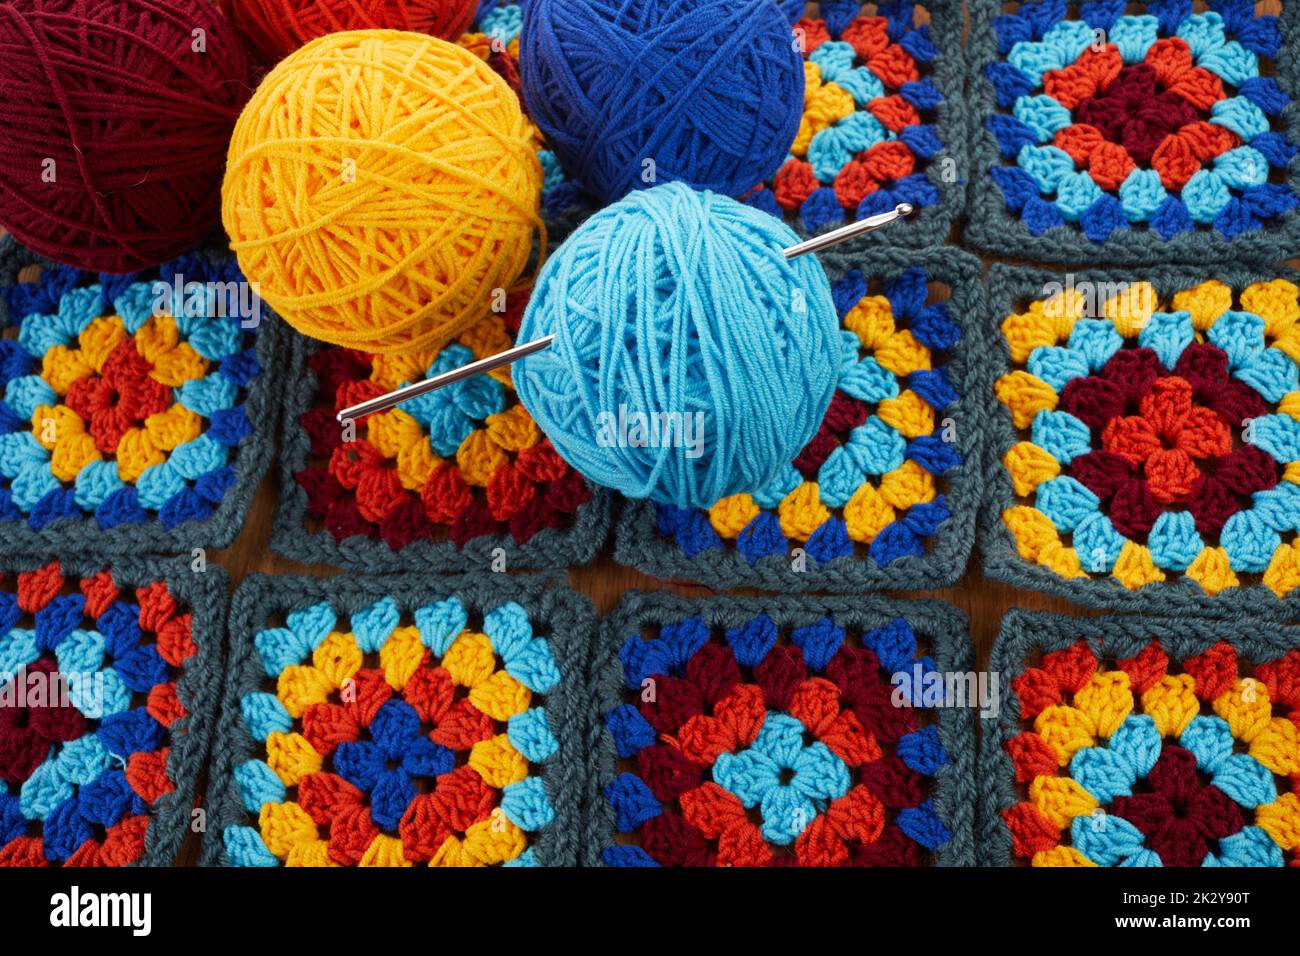 Granny squares. Crocheting supplies, colored wool yarn and knitting crocheting Stock Photo